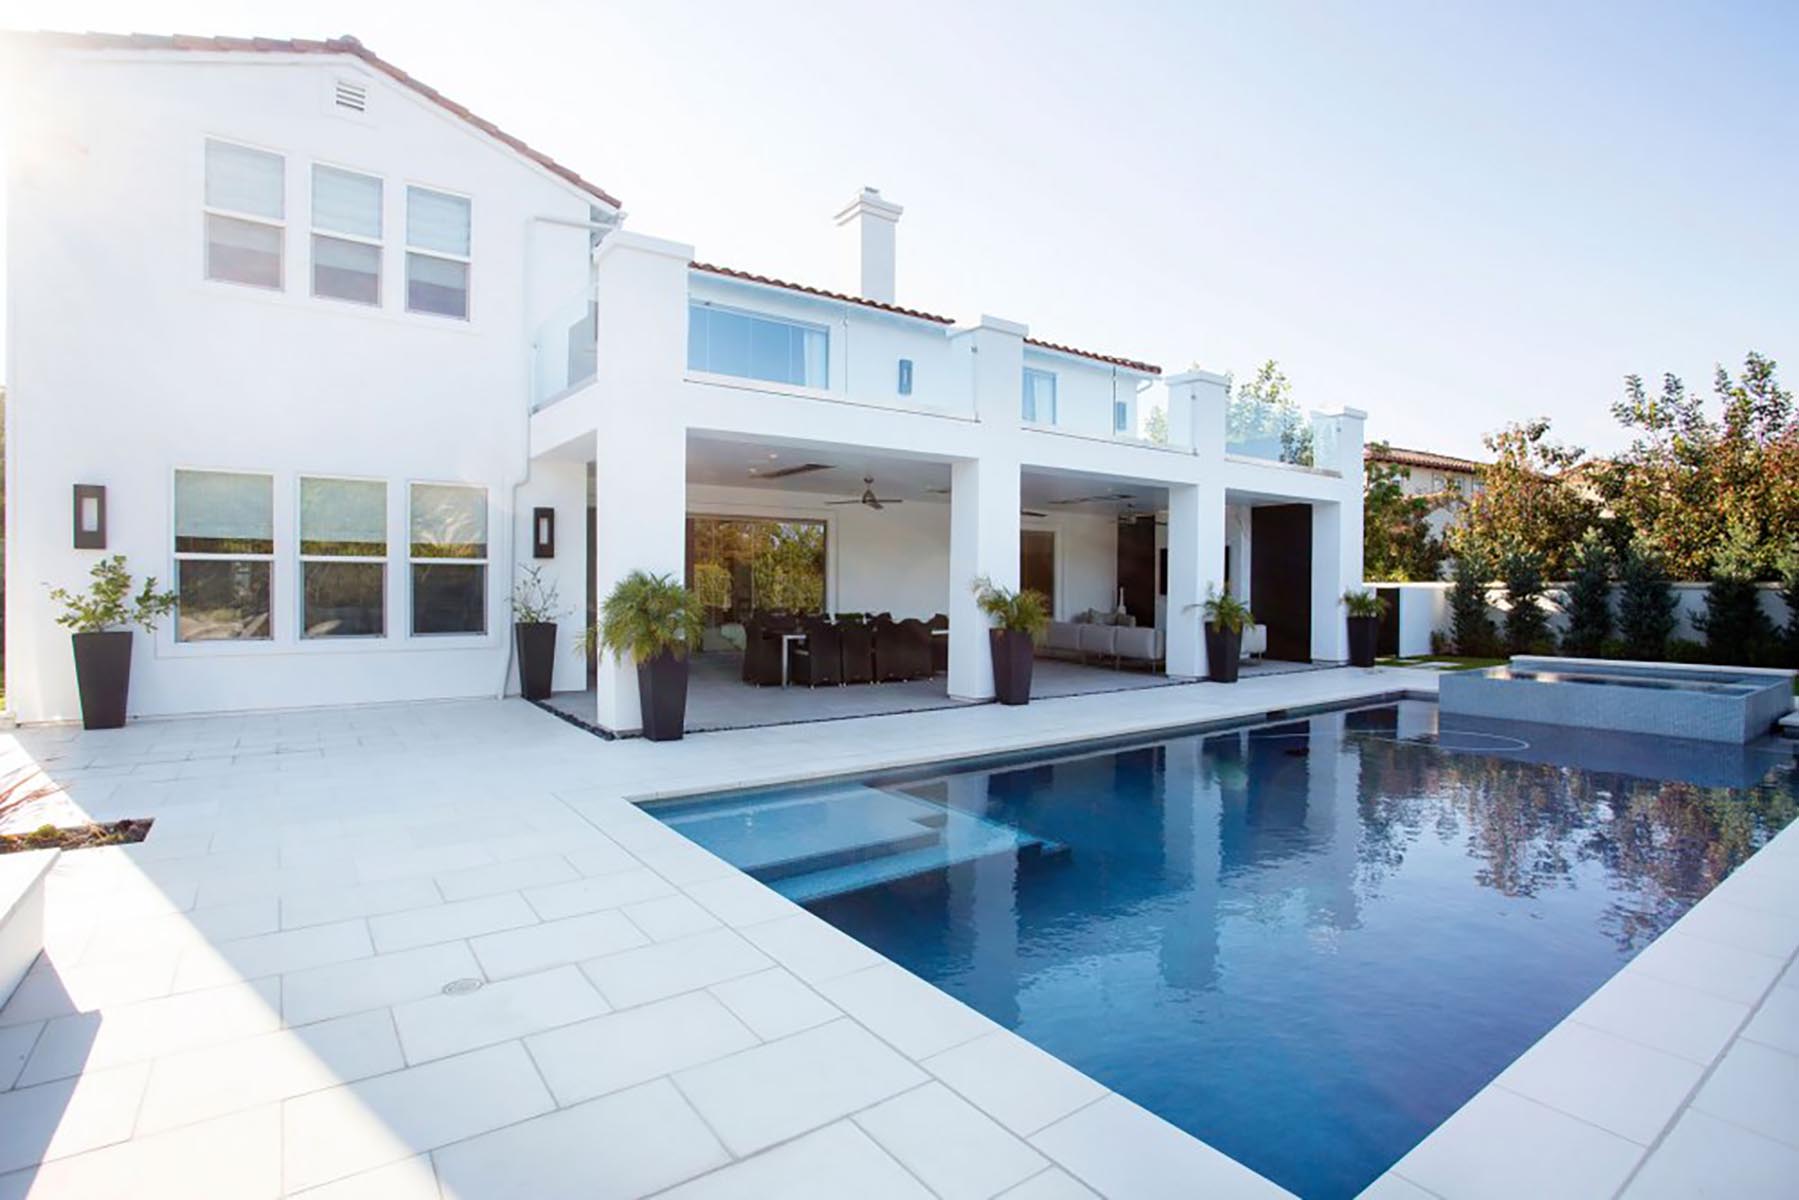 A white modern home with a large pool